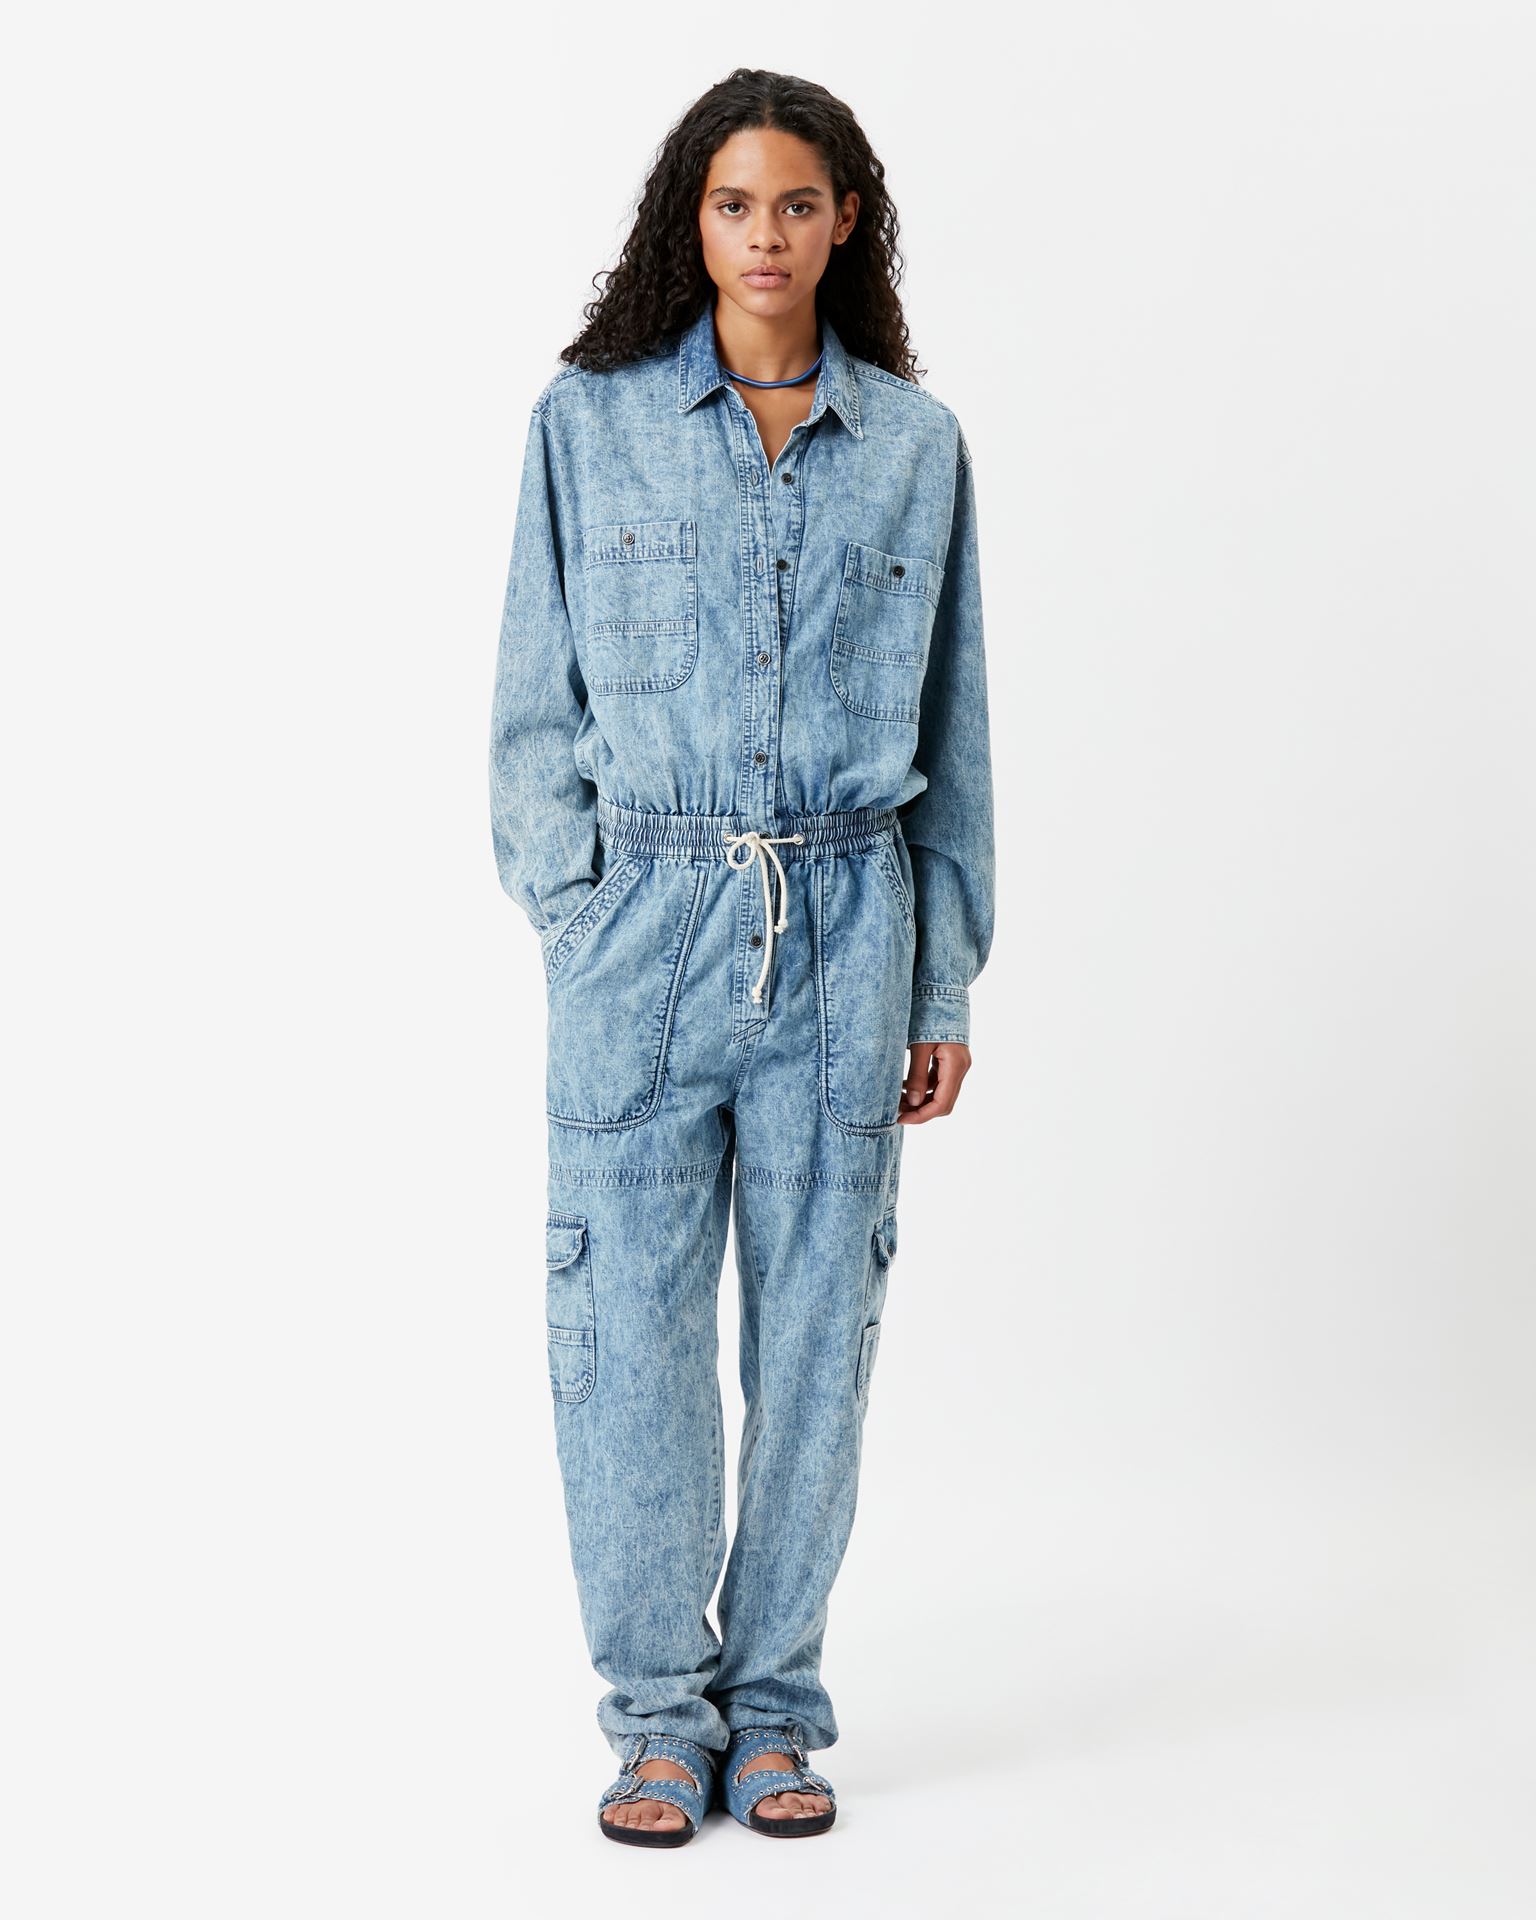 Isabel Marant Marant Étoile, Veado Overall In Washed Out Cotton - Women - Blue